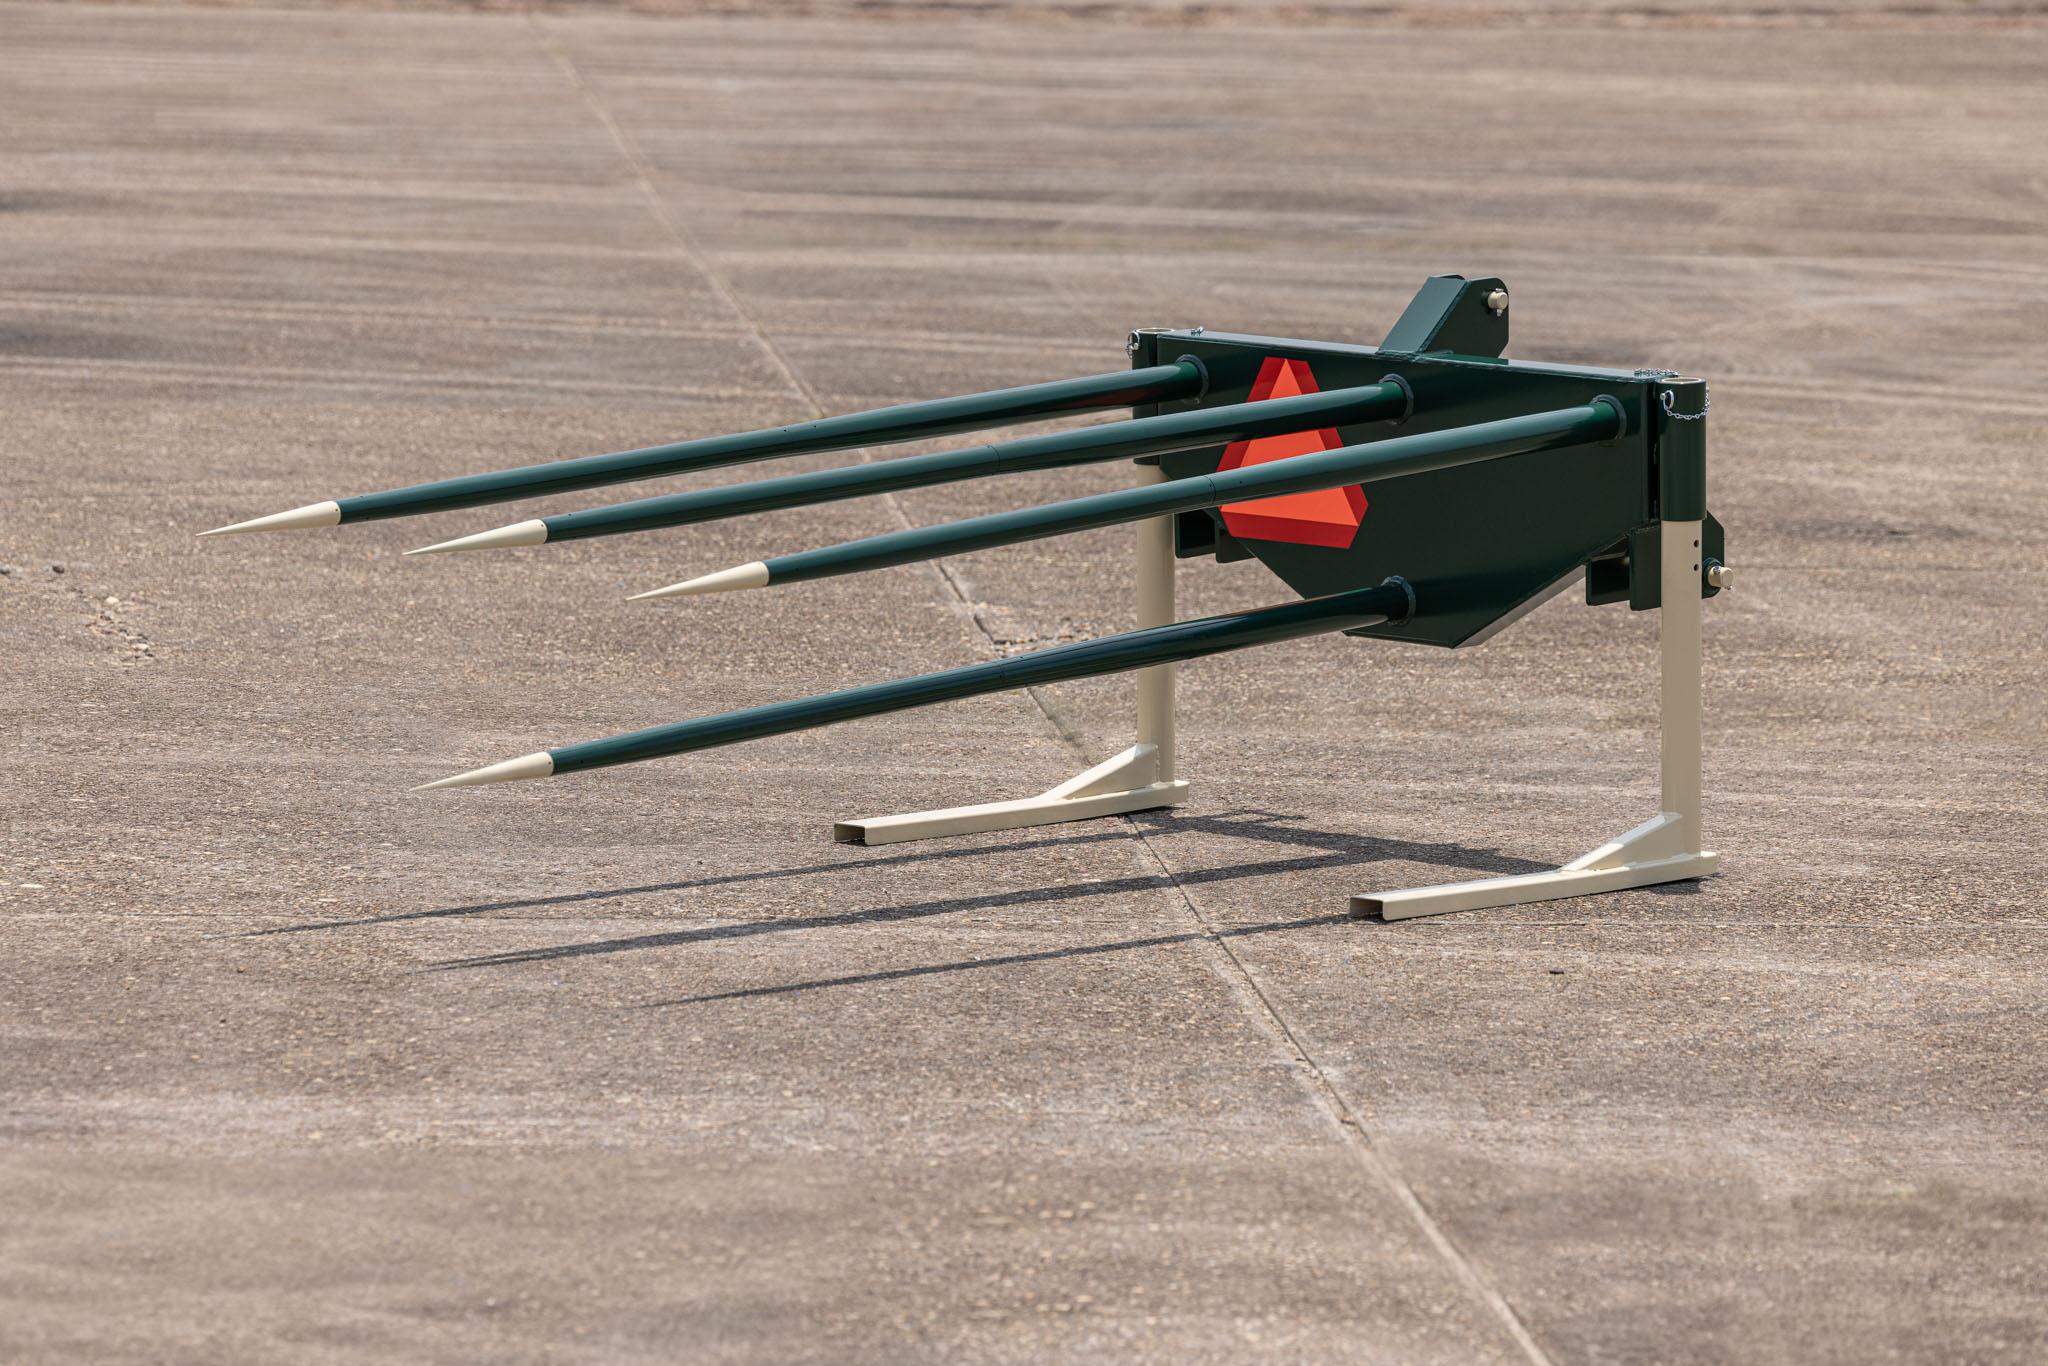 agriculture implement with 4 spikes on front sitting on concrete airport tarmac.